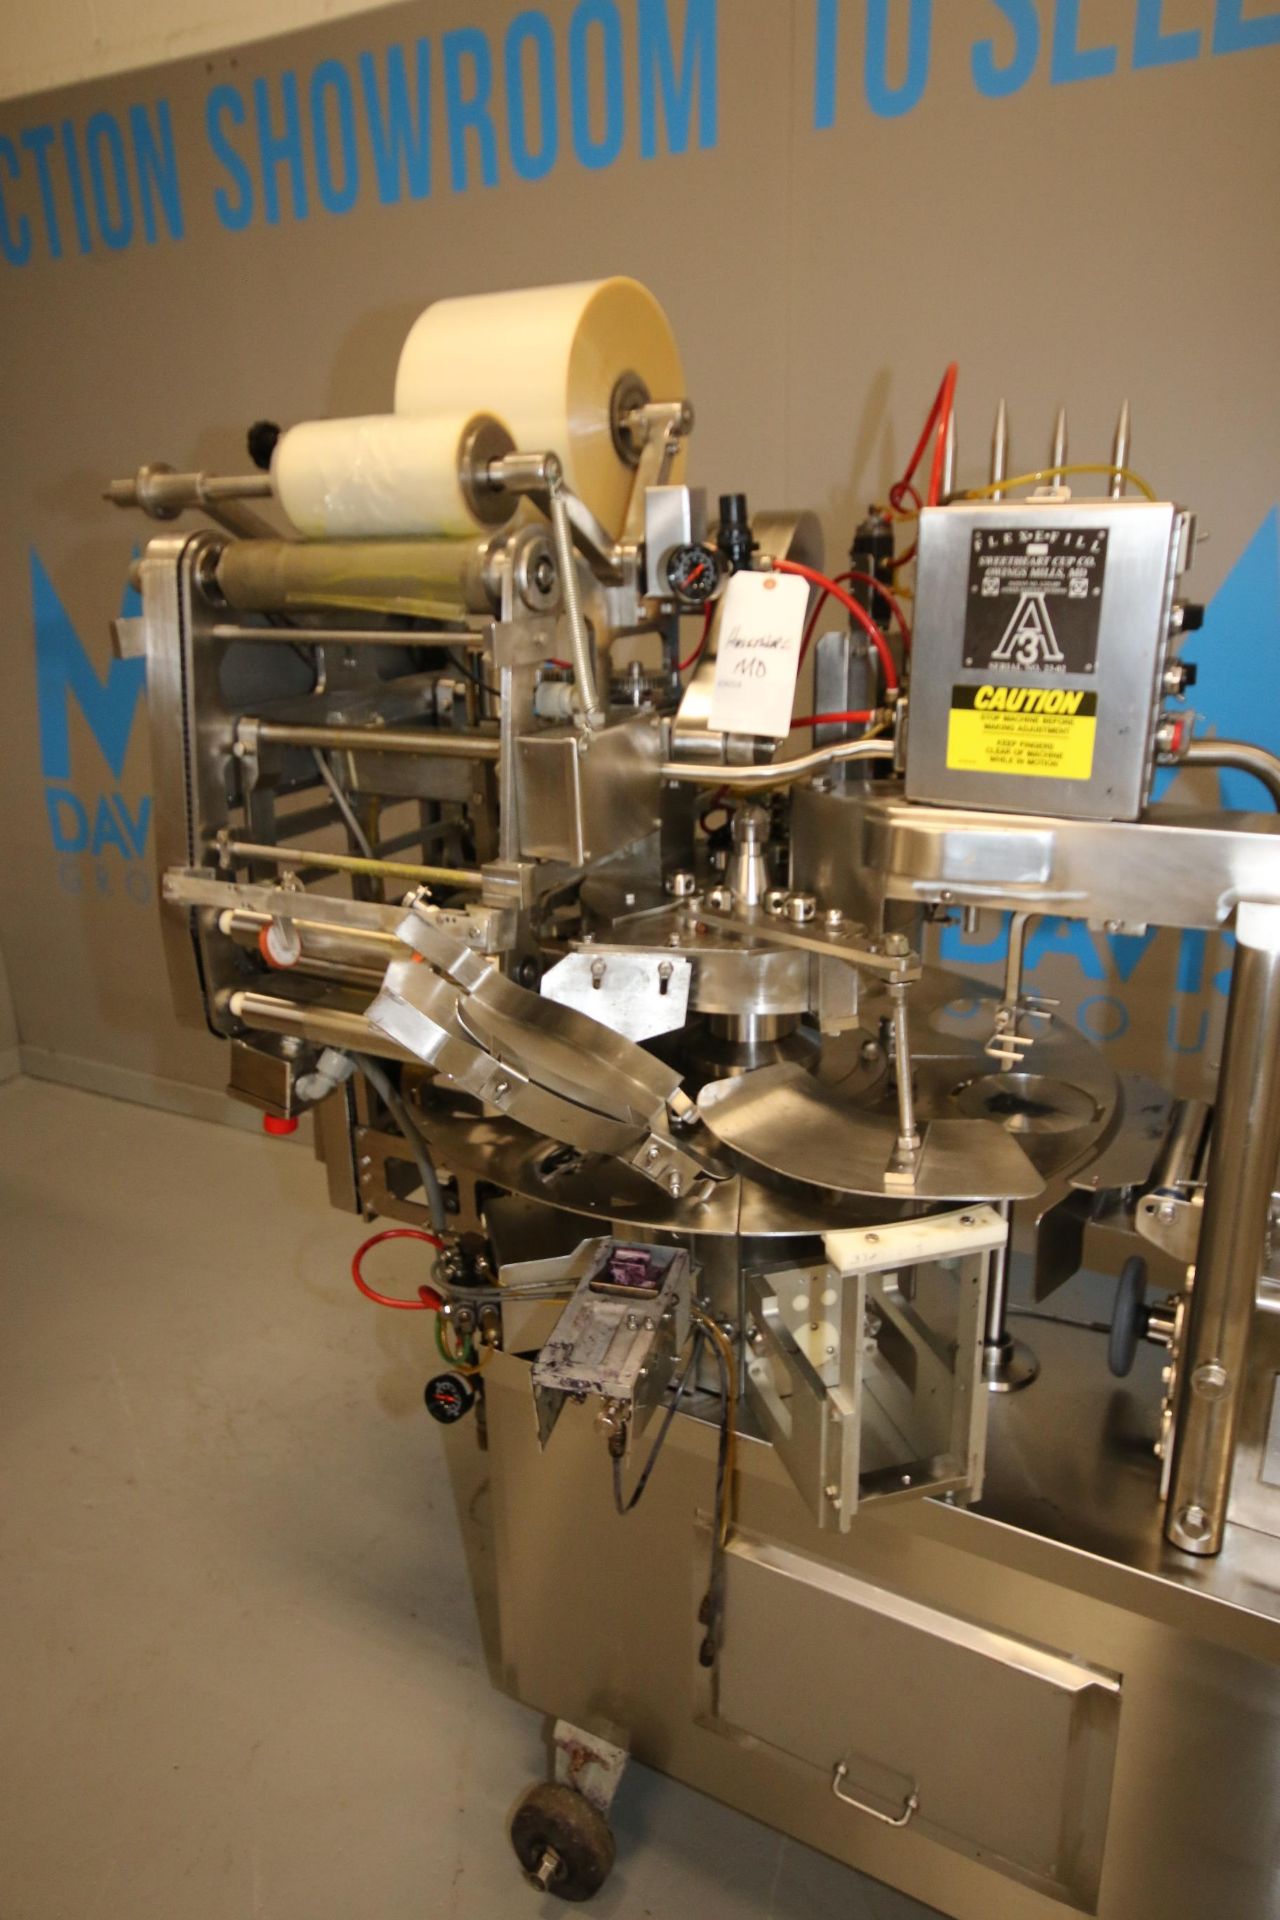 Sweetheart Cup. Co. / Flexefill 8 - Station Rotary S/S Cup Sealer, S/N 23-02, Set - Up with 5.5" - Image 3 of 12